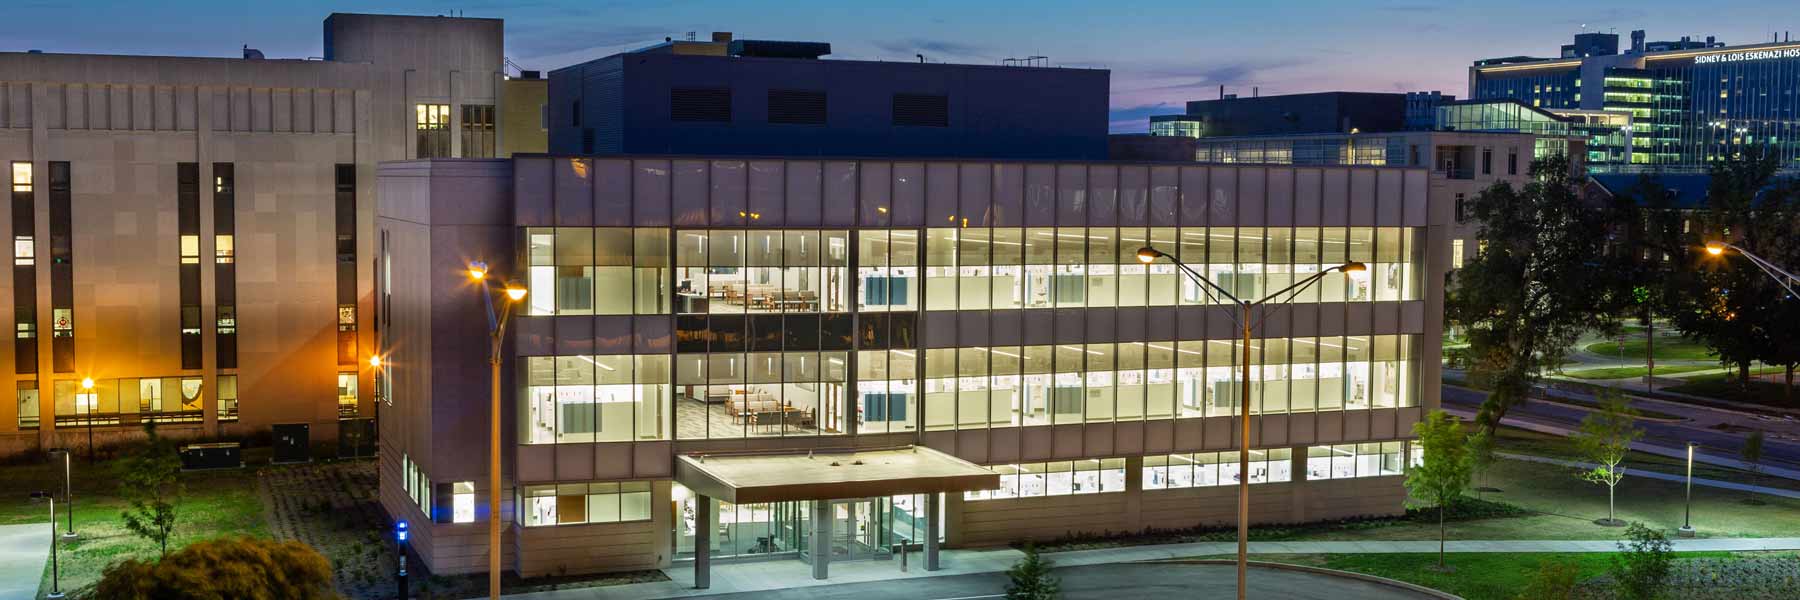 View of the exterior of the Indiana University School of Dentistry building in Indianapolis at night